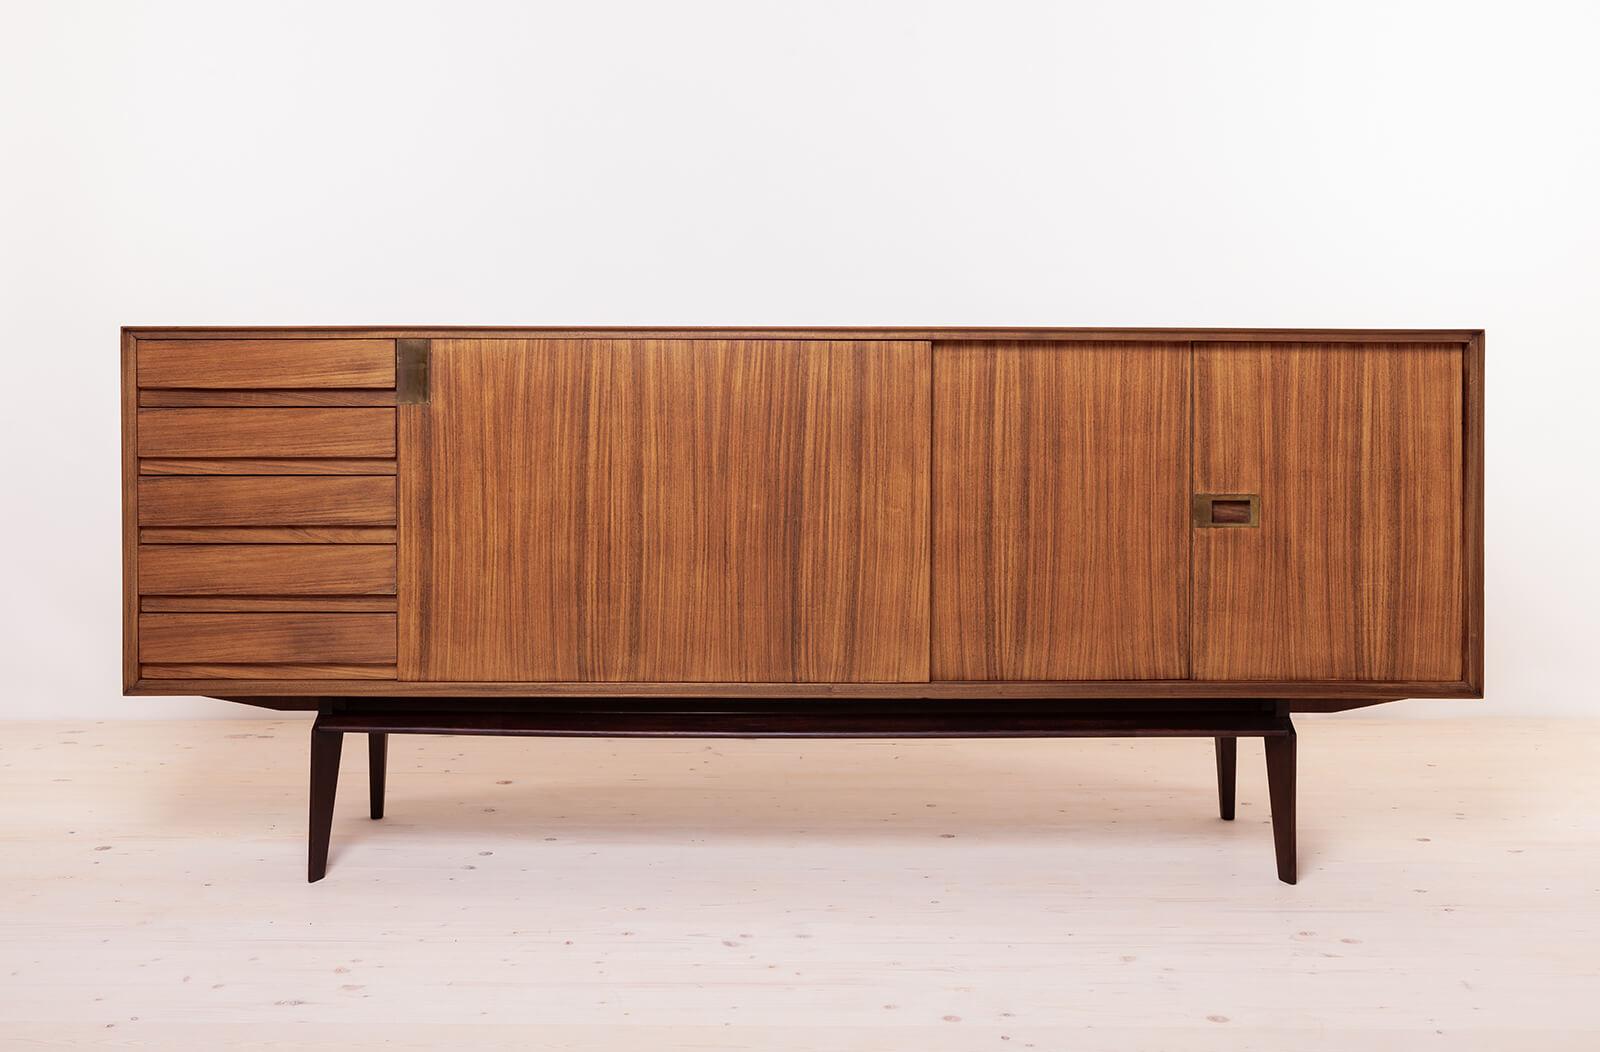 This gorgeous sideboard is a true masterpiece designed by Edmondo Palutari around 1950s for Mobili Dassi Moderni. This extraordinary piece seamlessly blends beautiful Italian design and function, making it a must-have for discerning connoisseurs.